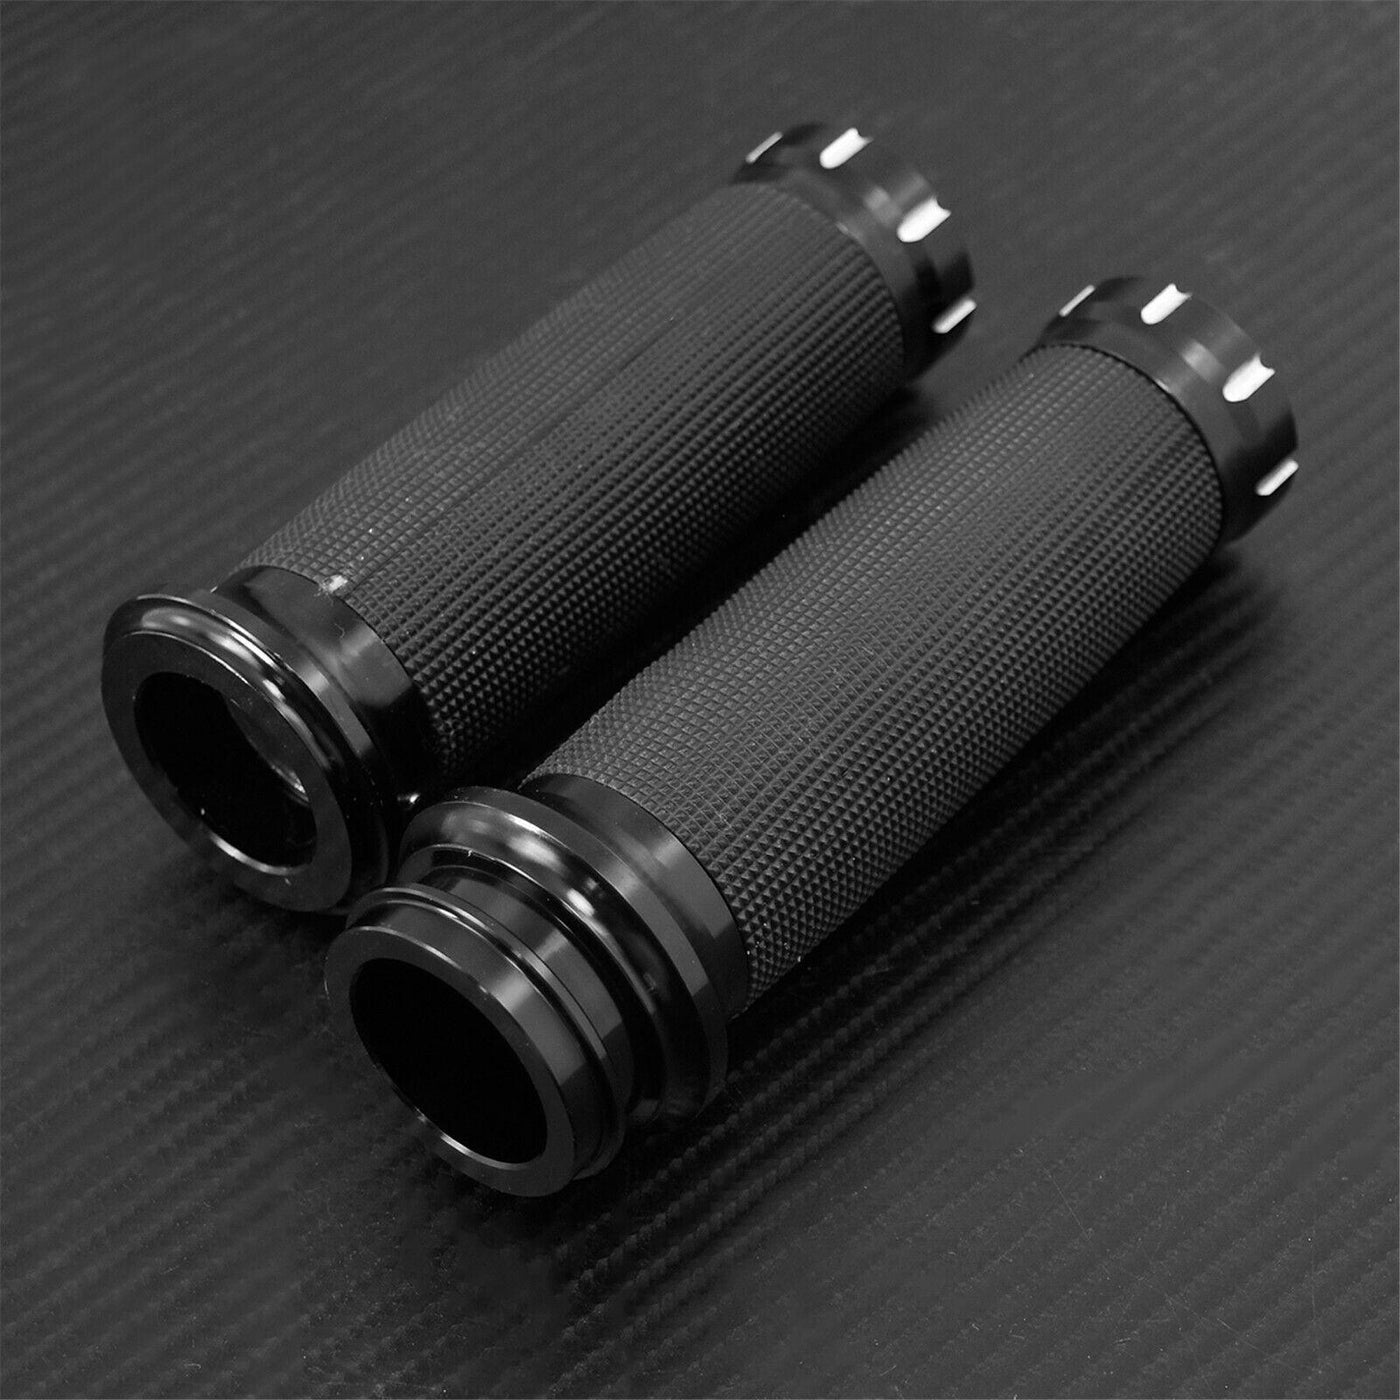 1" Electronic Throttle Hand Grips Handlebar Fit For Harley Touring 08-up FLS 16 - Moto Life Products